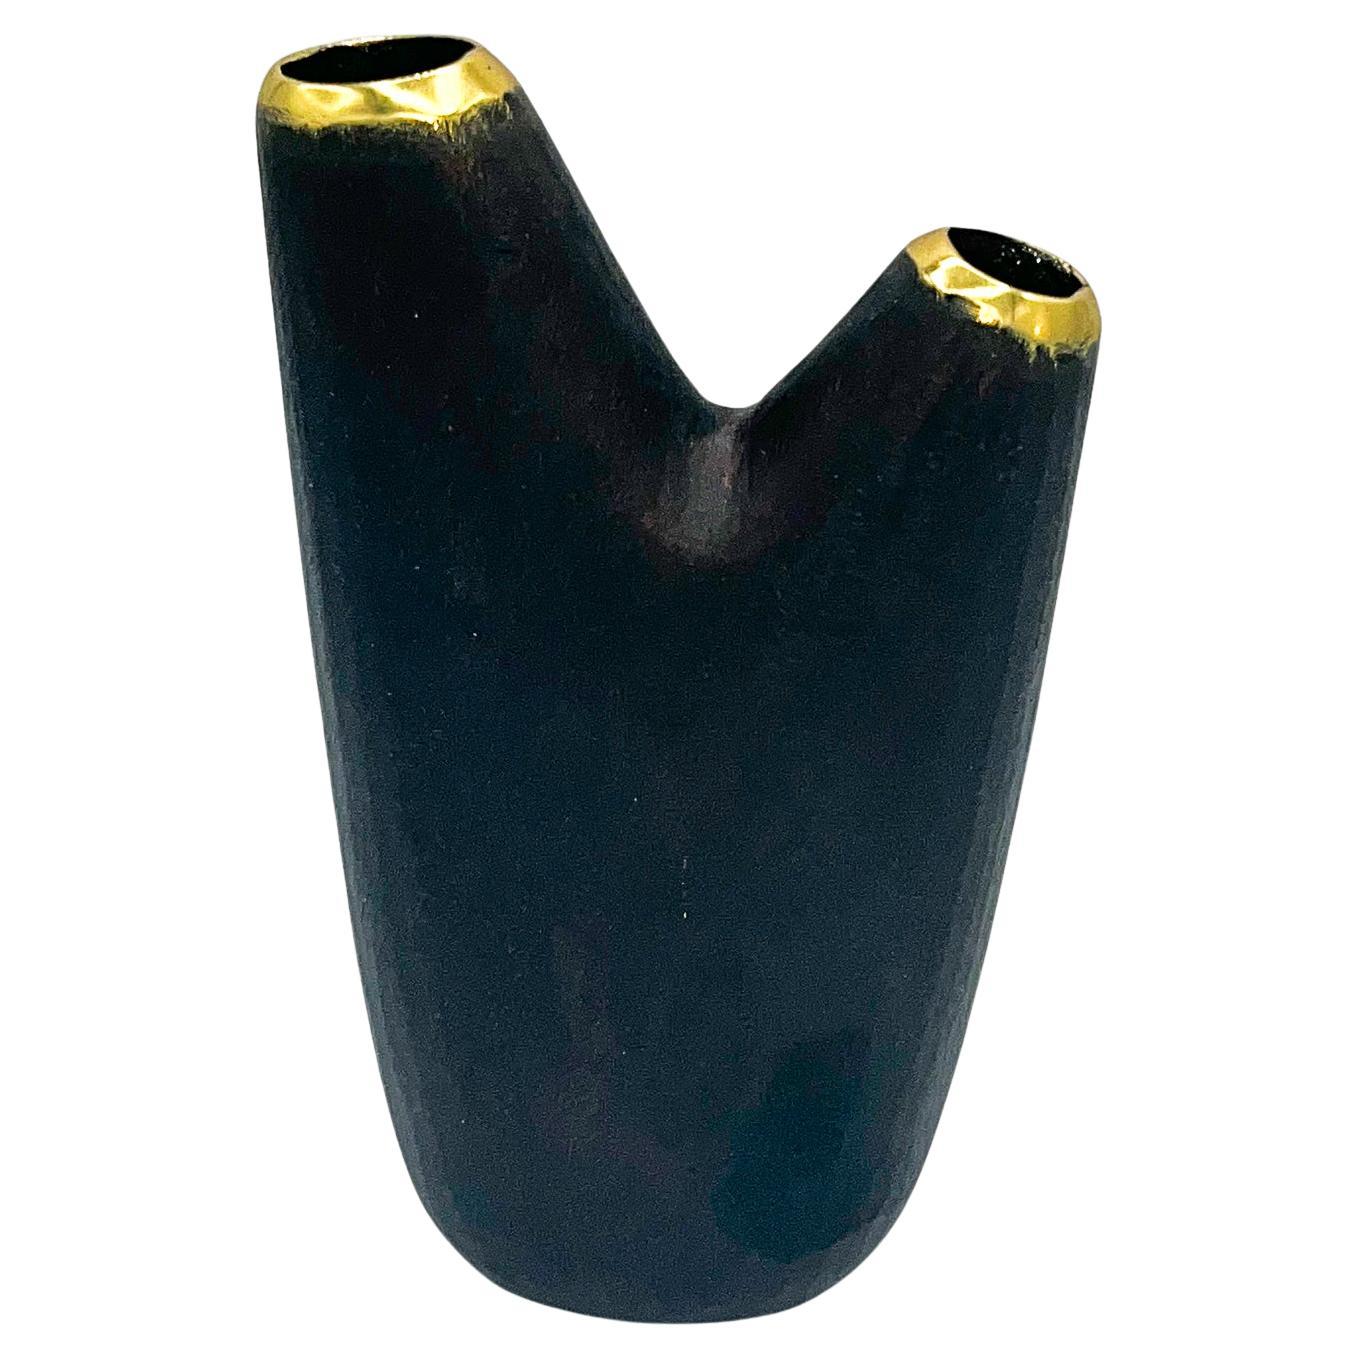 Carl Aubo¨ck Model #3794 'Aorta' Brass Vase. This exceptionally crafted vase by Carl Aubock is a wonderful example of the marriage of form and functionality that has made the Aubock name synonymous with great design. Aubock items have become highly